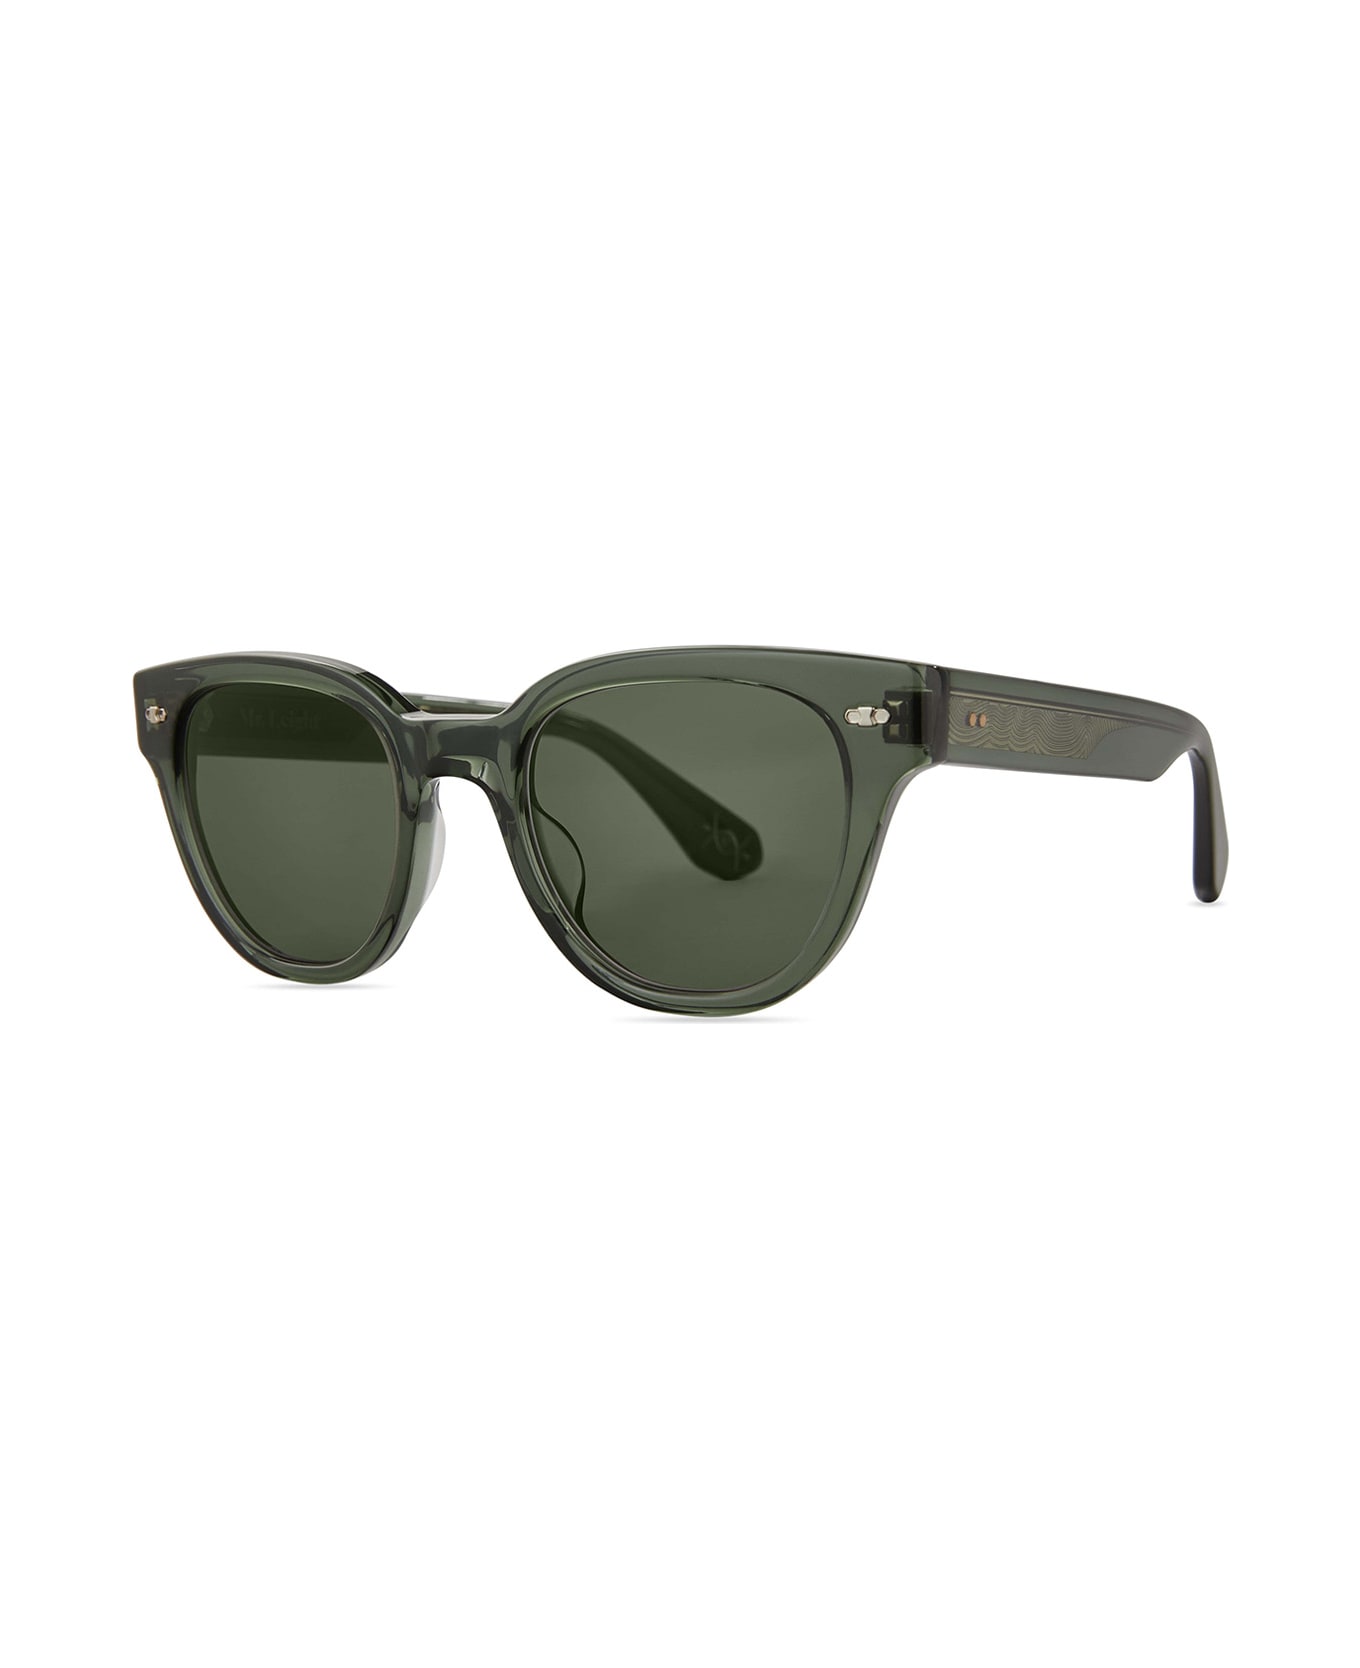 Mr. Leight Jane S Forest Glow-white Gold/g15 Sunglasses - Forest Glow-White Gold/G15